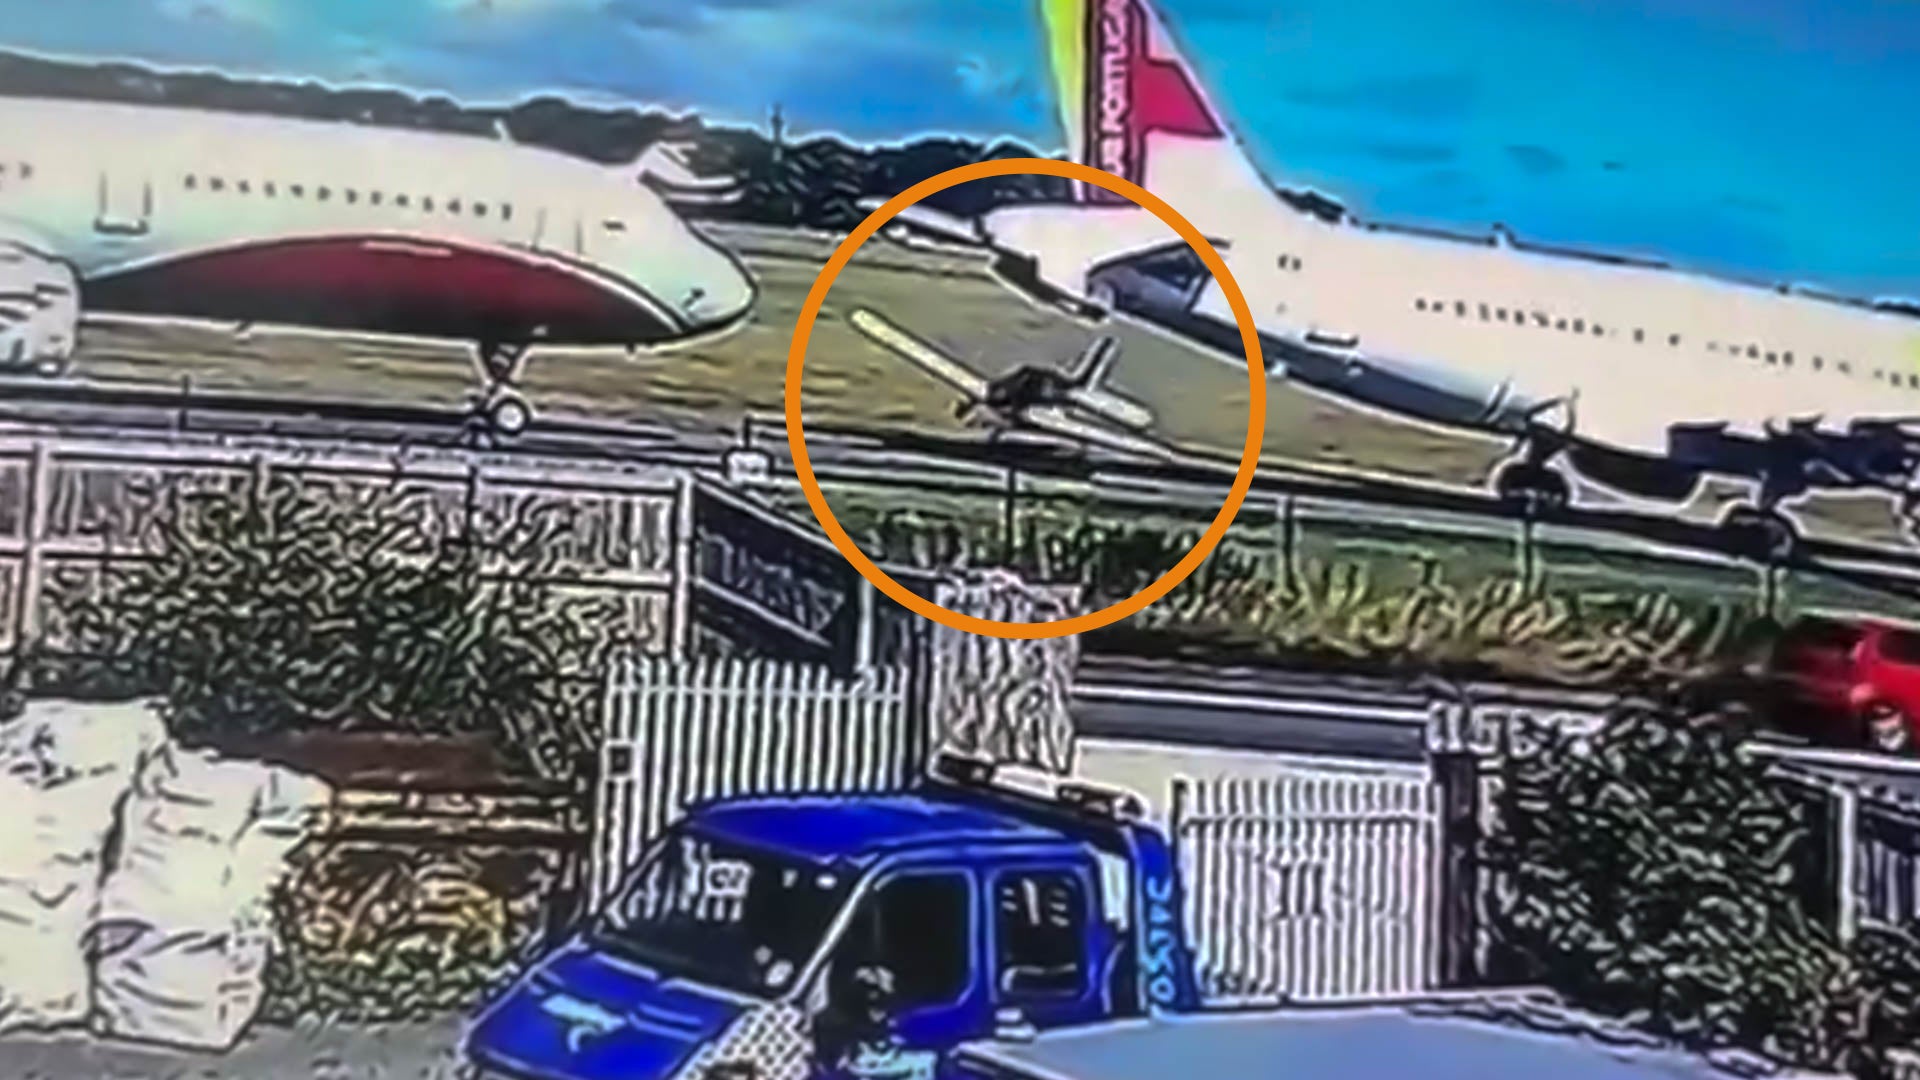 Watch This Small Plane Thread the Needle Between Two Jetliners in Unbelievable Video